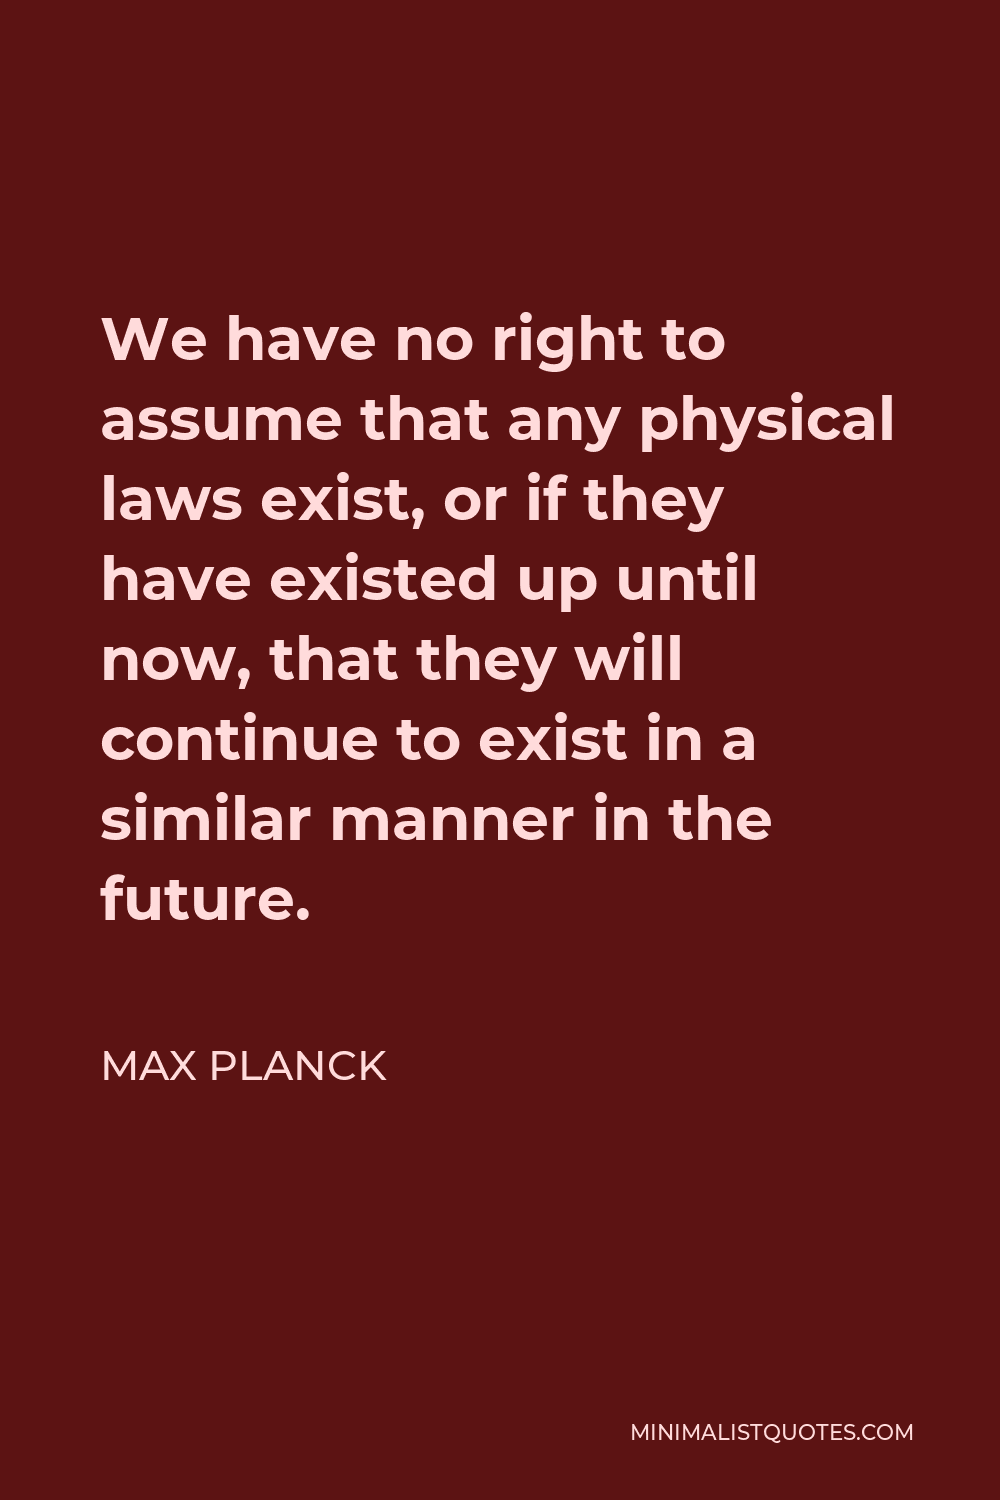 Max Planck Quote - We have no right to assume that any physical laws exist, or if they have existed up until now, that they will continue to exist in a similar manner in the future.